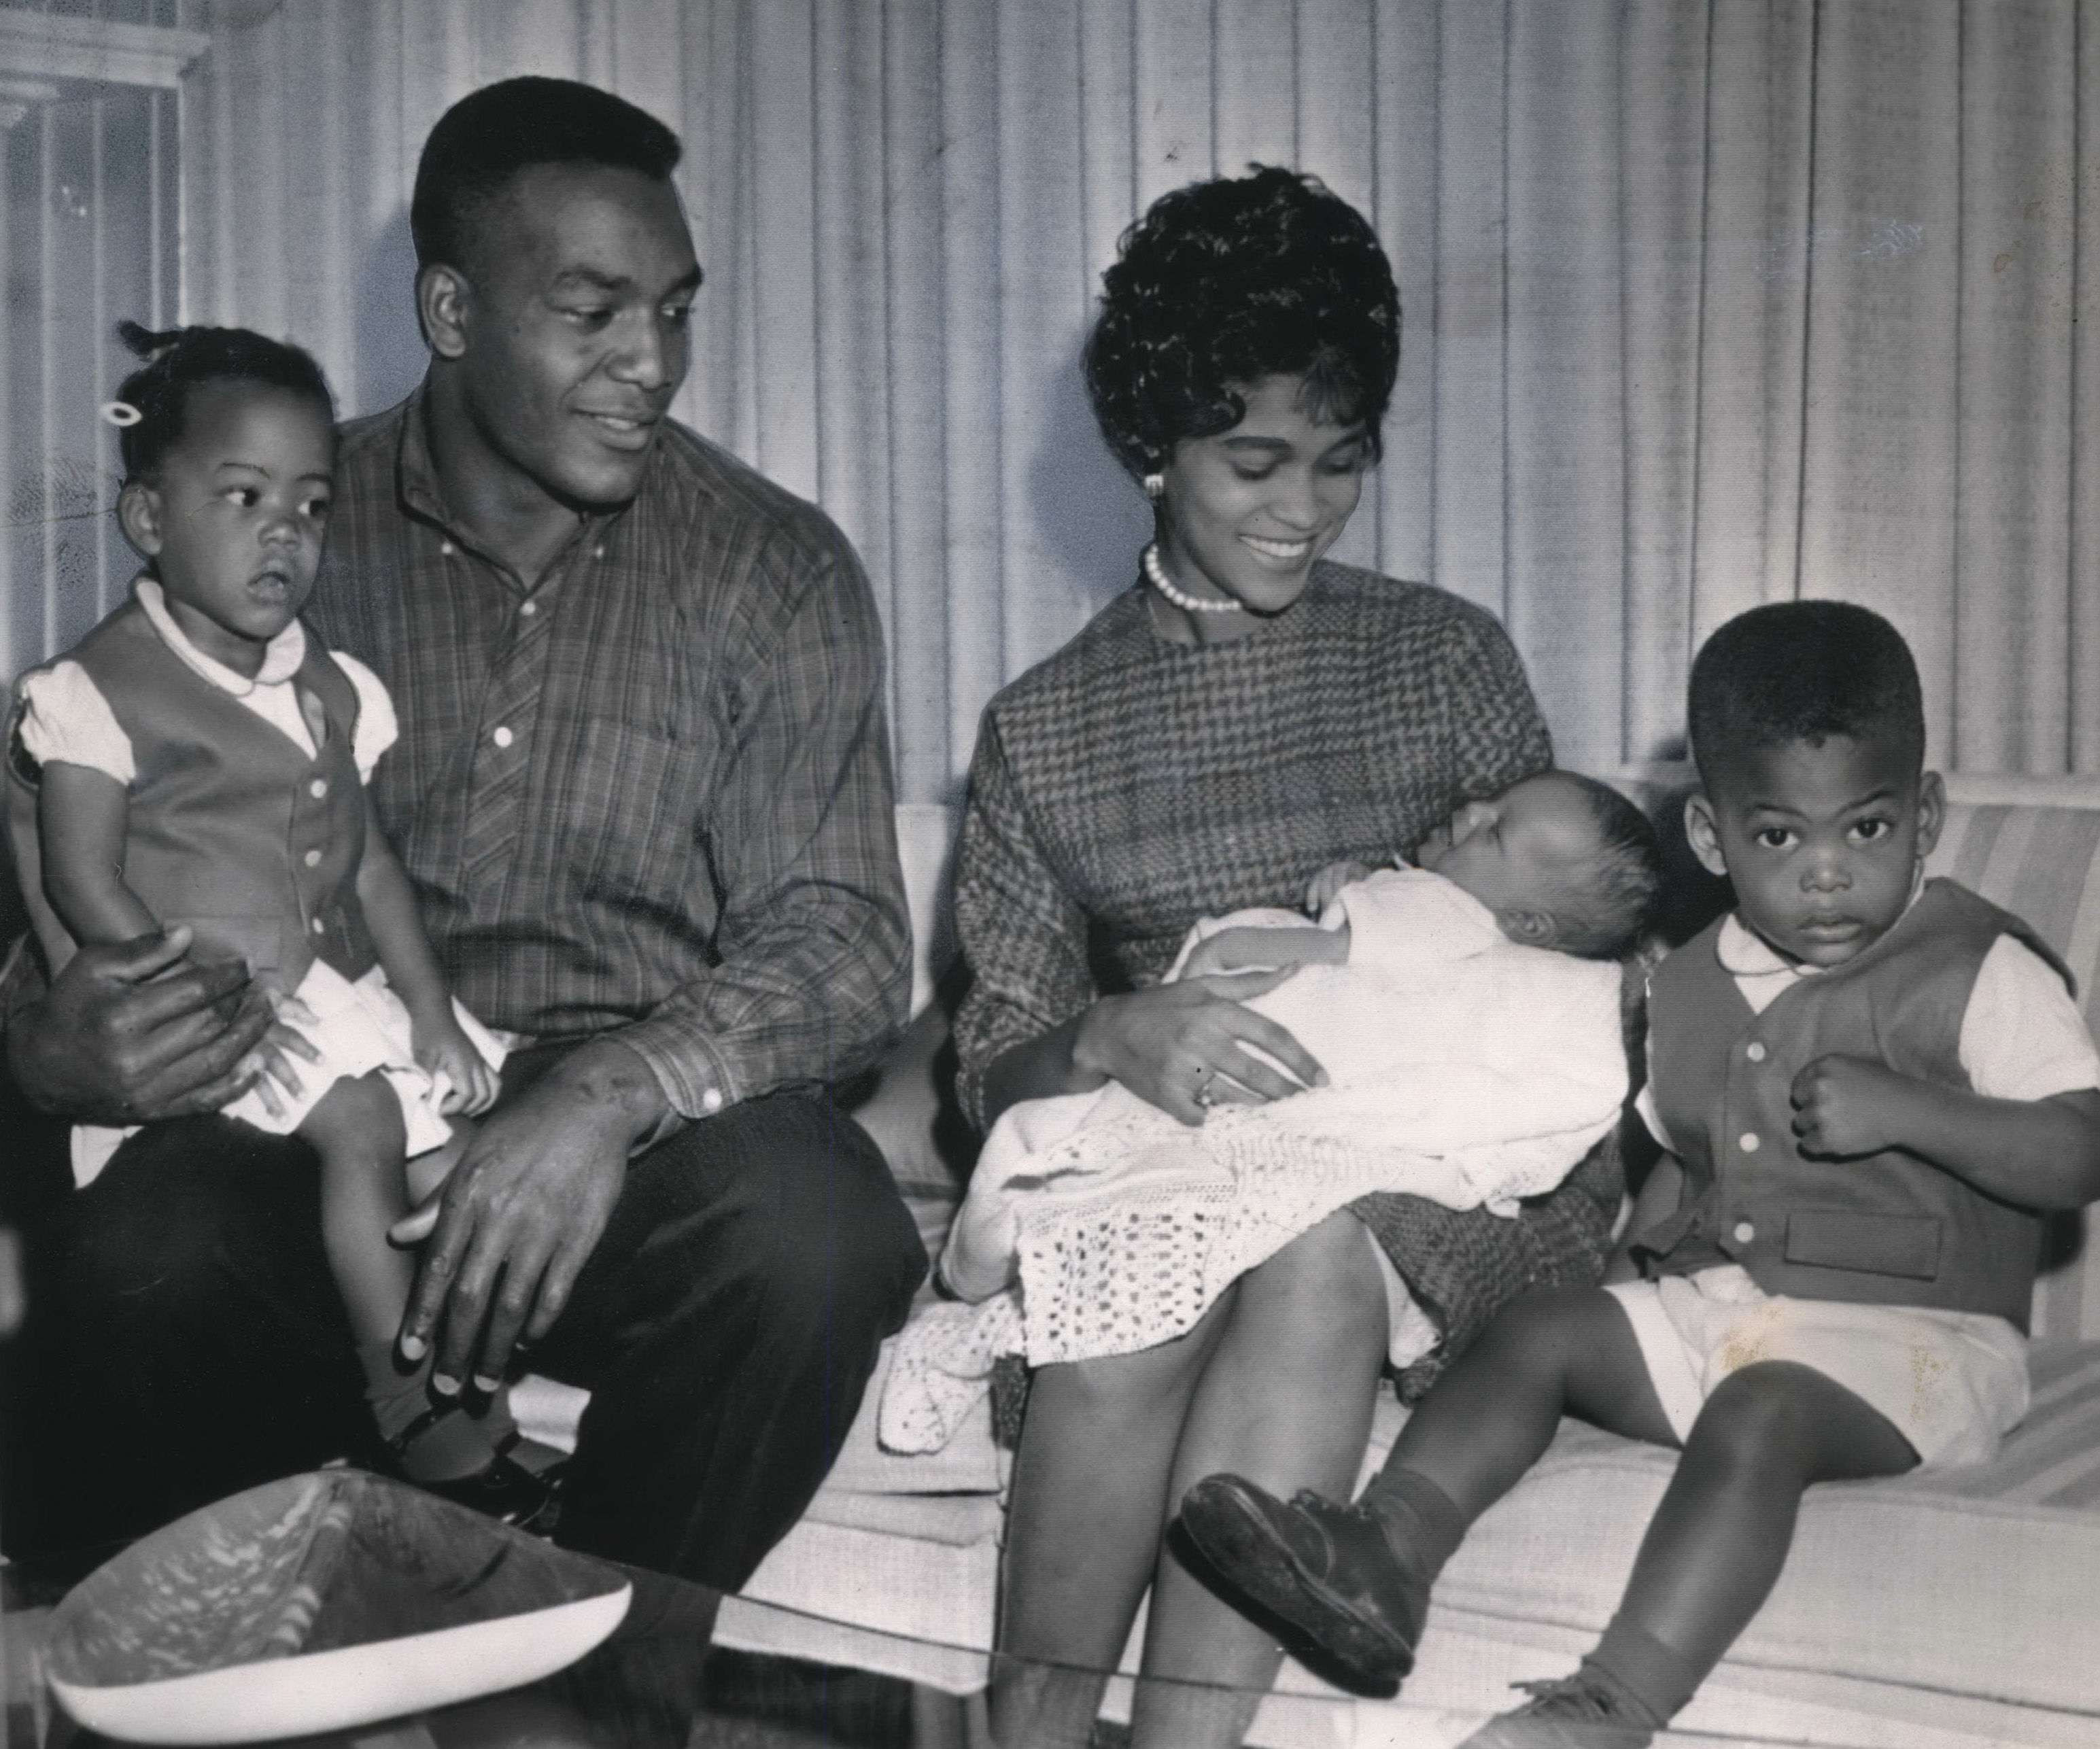 The Browns of Cleveland are not excited over the former Orange grid star's great day against the Philadelphia Eagles.  Jim Brown cruised along for 237 yards gained to tie his old single game NFL mark set in 1957.  Seated and holding 3 week-old Jim Jr., is wife, Sue.  Has Kim, nearly 2, on lap, while twin, Kevin, wonders what it's all about.